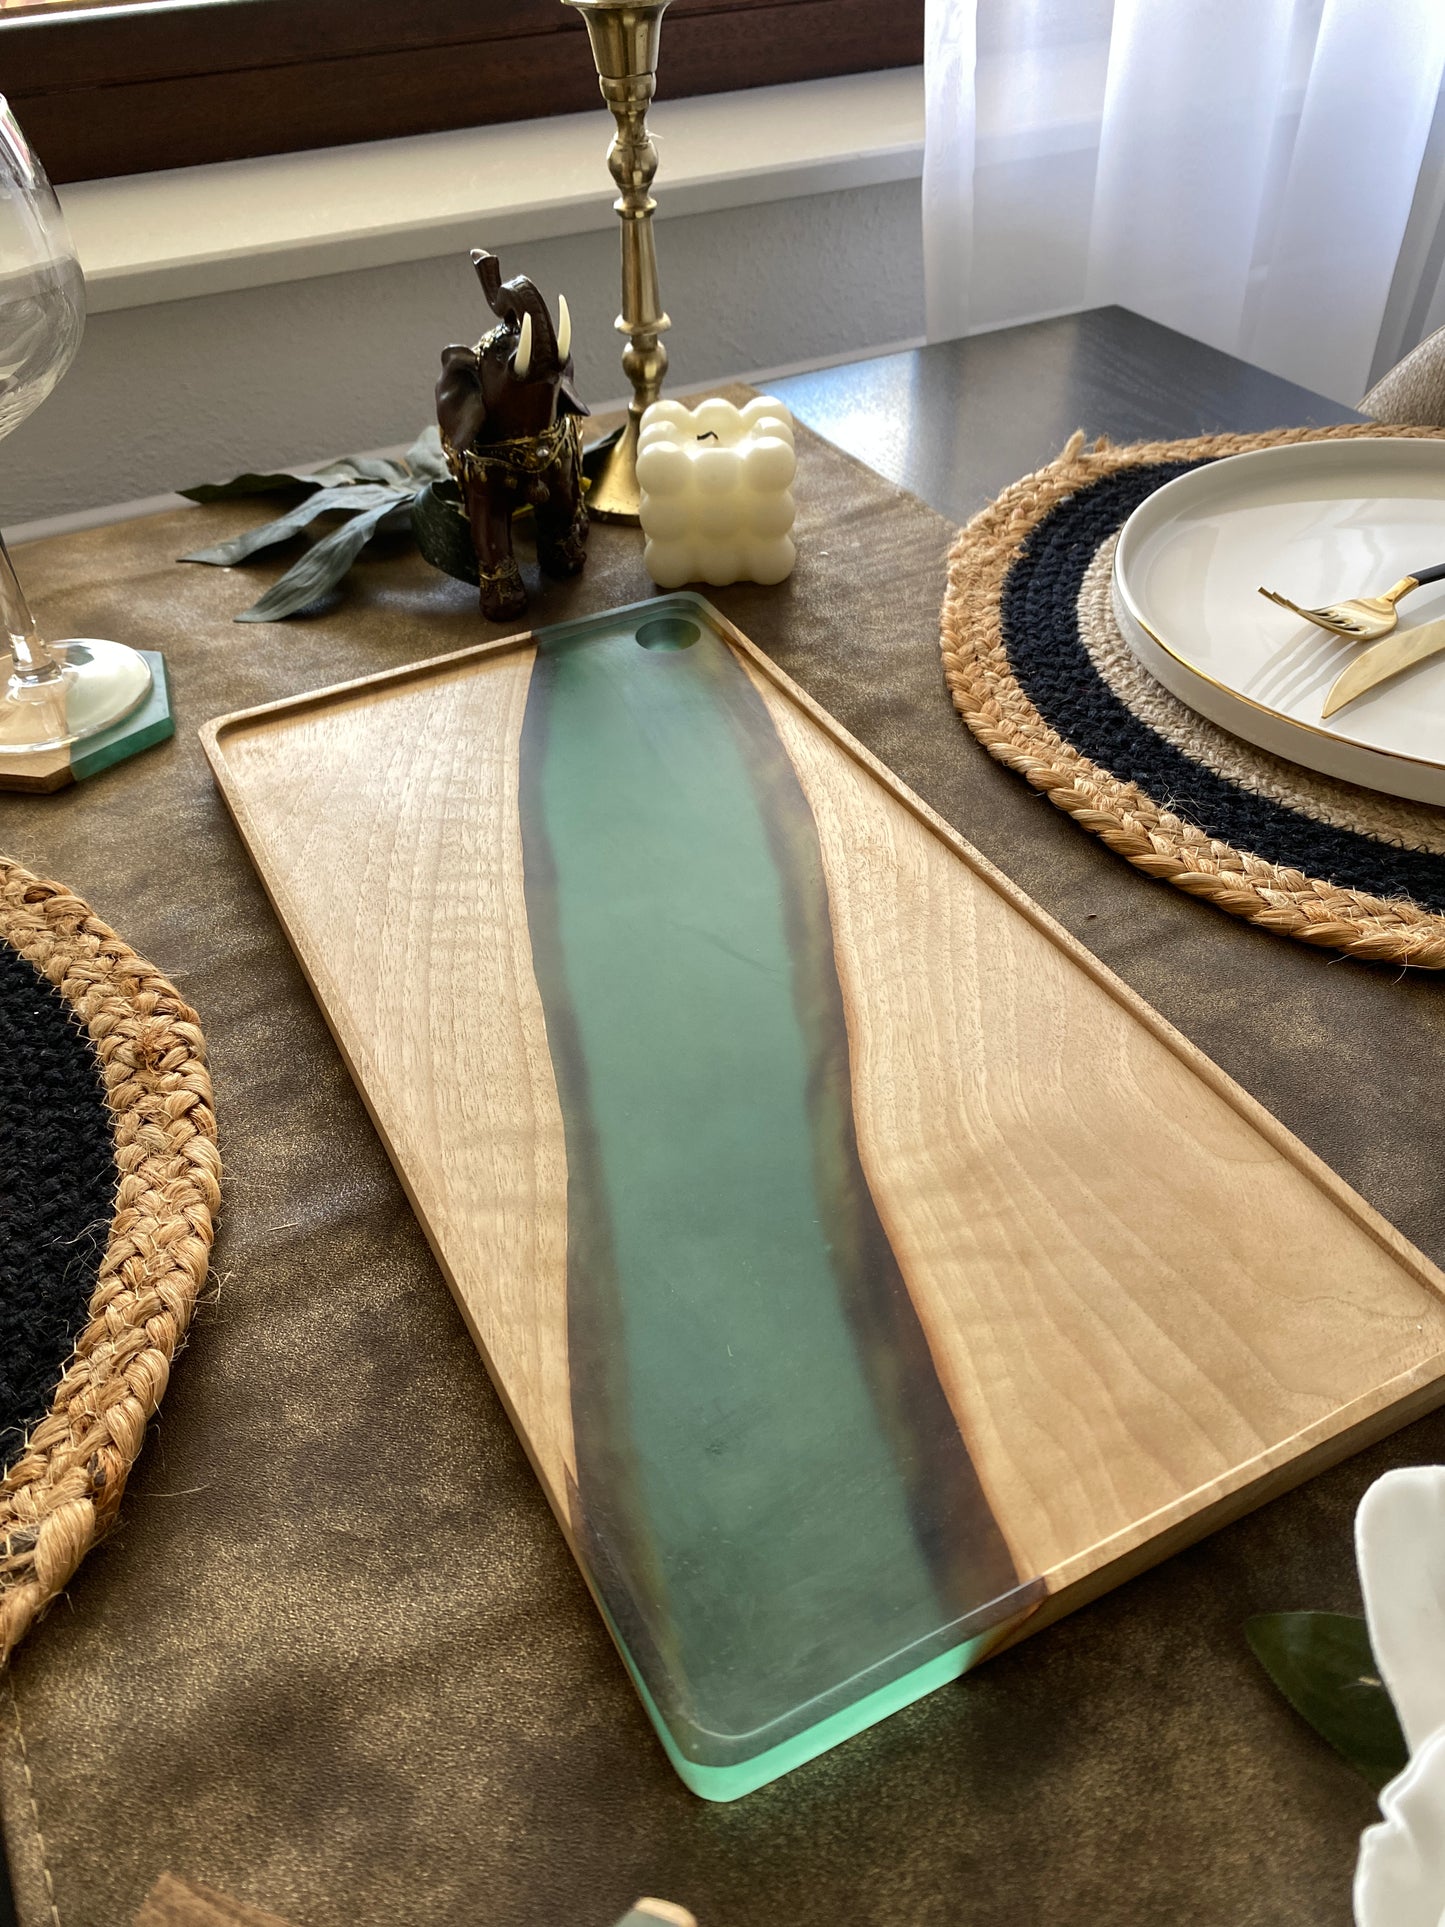 Stylish serving board in turquoise